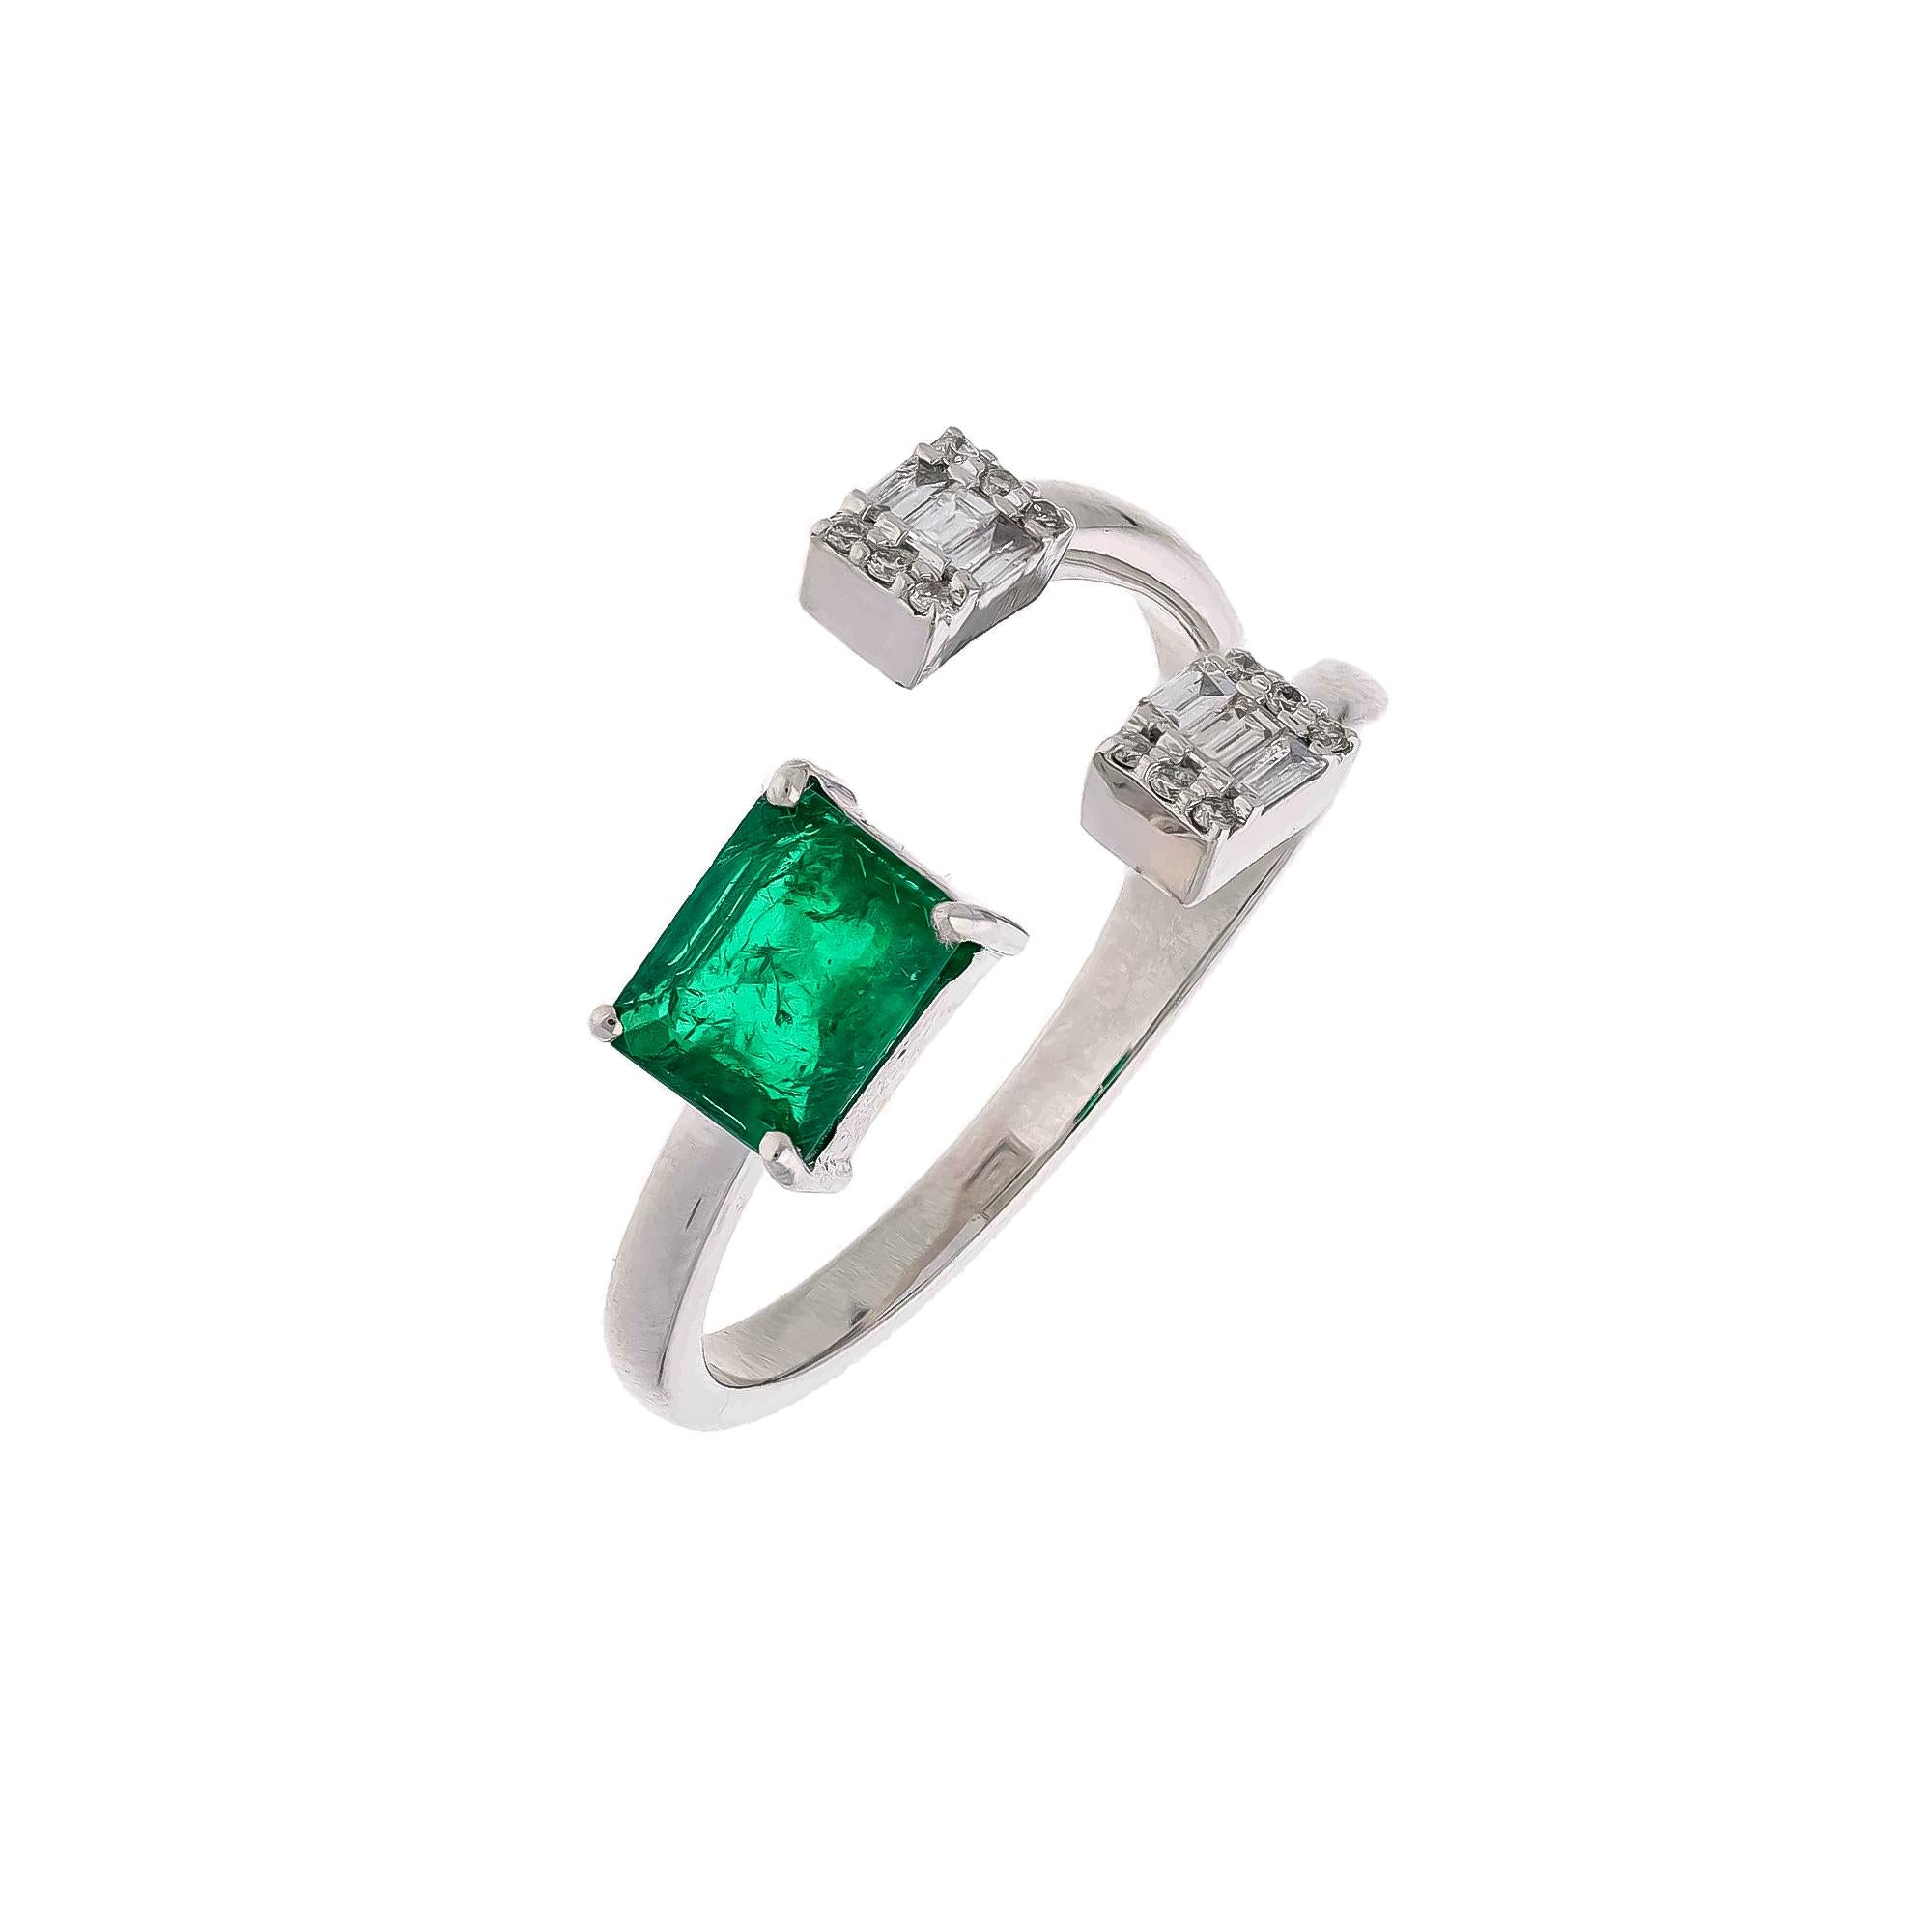 Diamonds : 0.16 carats
Emerald : 0.91carats
Gold : 3.19 gm( 18k)

This is a beautiful natural Columbian ring  with very high quality emeralds and diamonds ( vsi and G colour

Its very hard to capture the true color and luster of the stone, I have